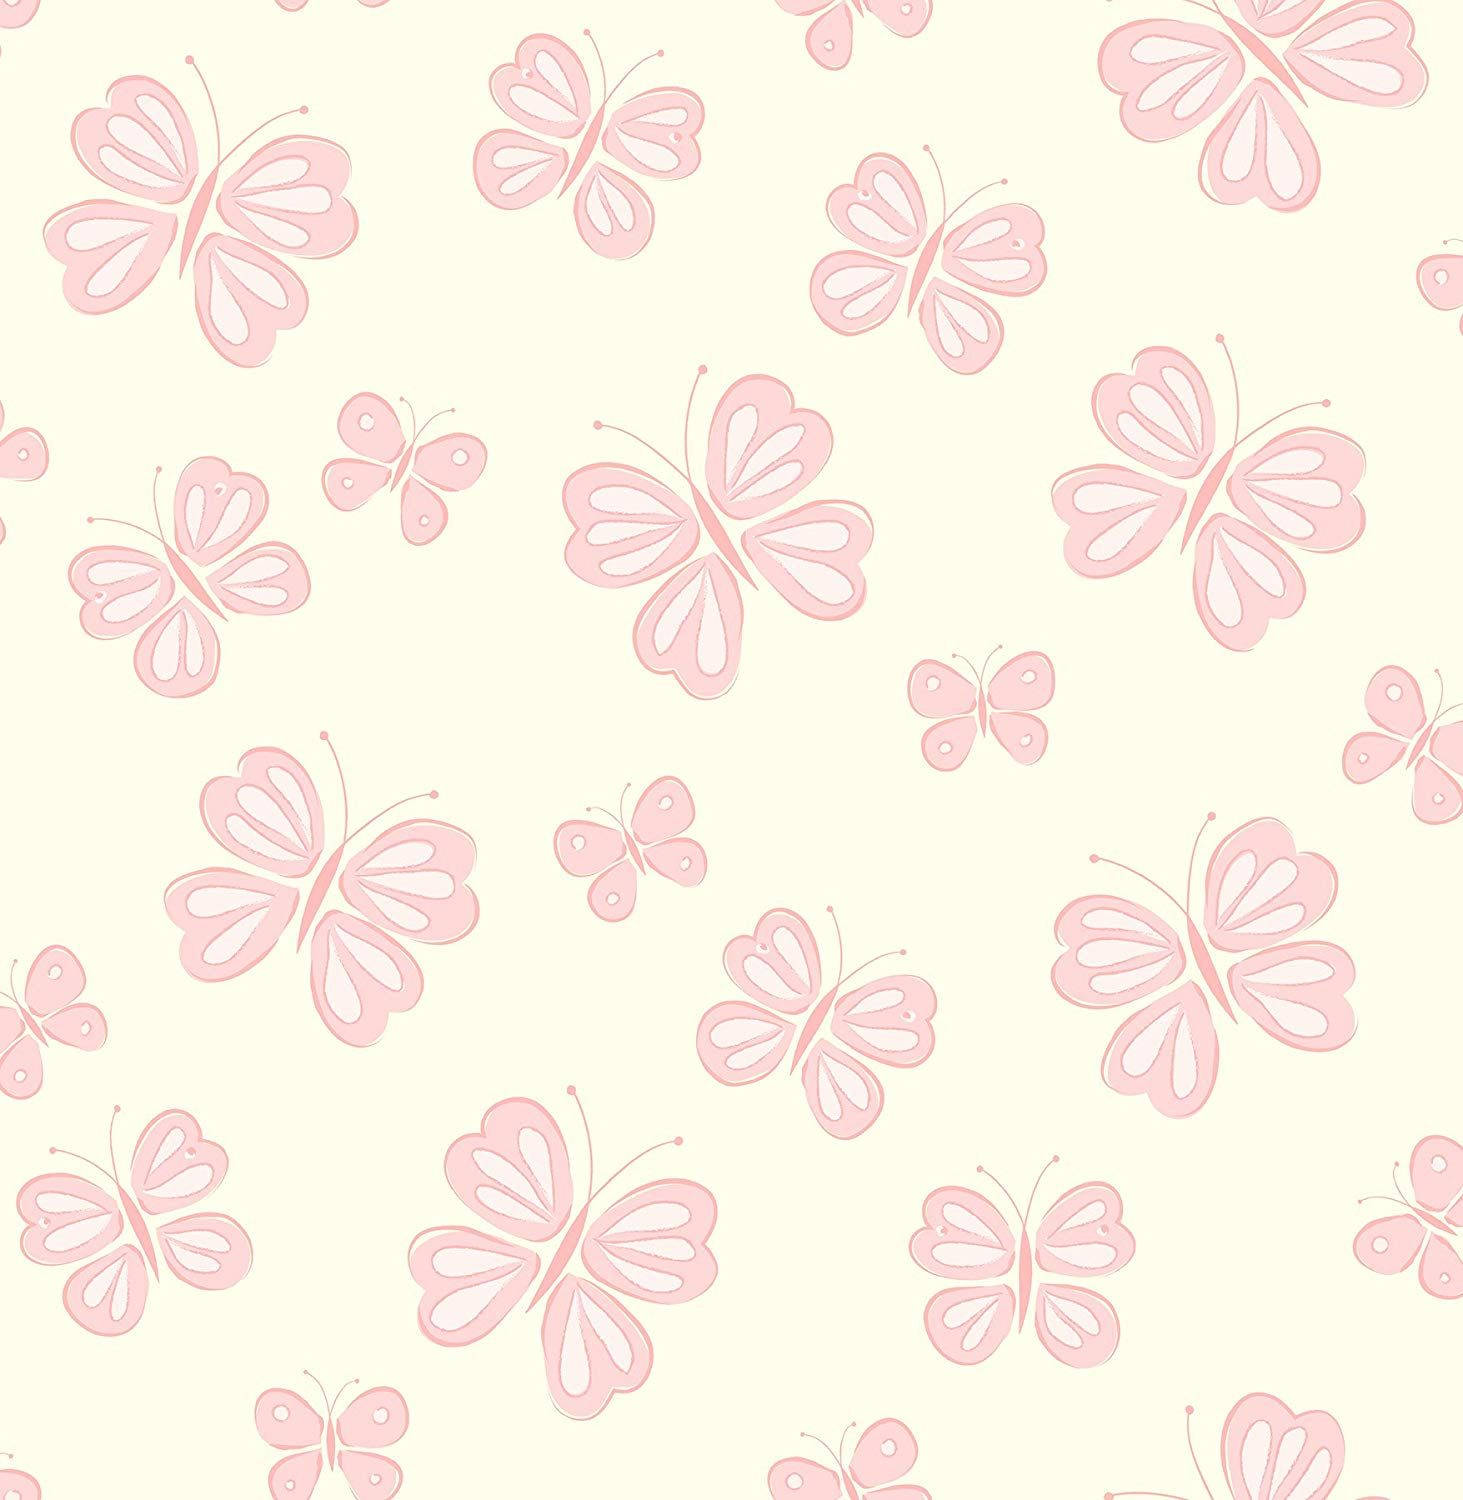 Background With Cute Pink Butterfly Design Wallpaper